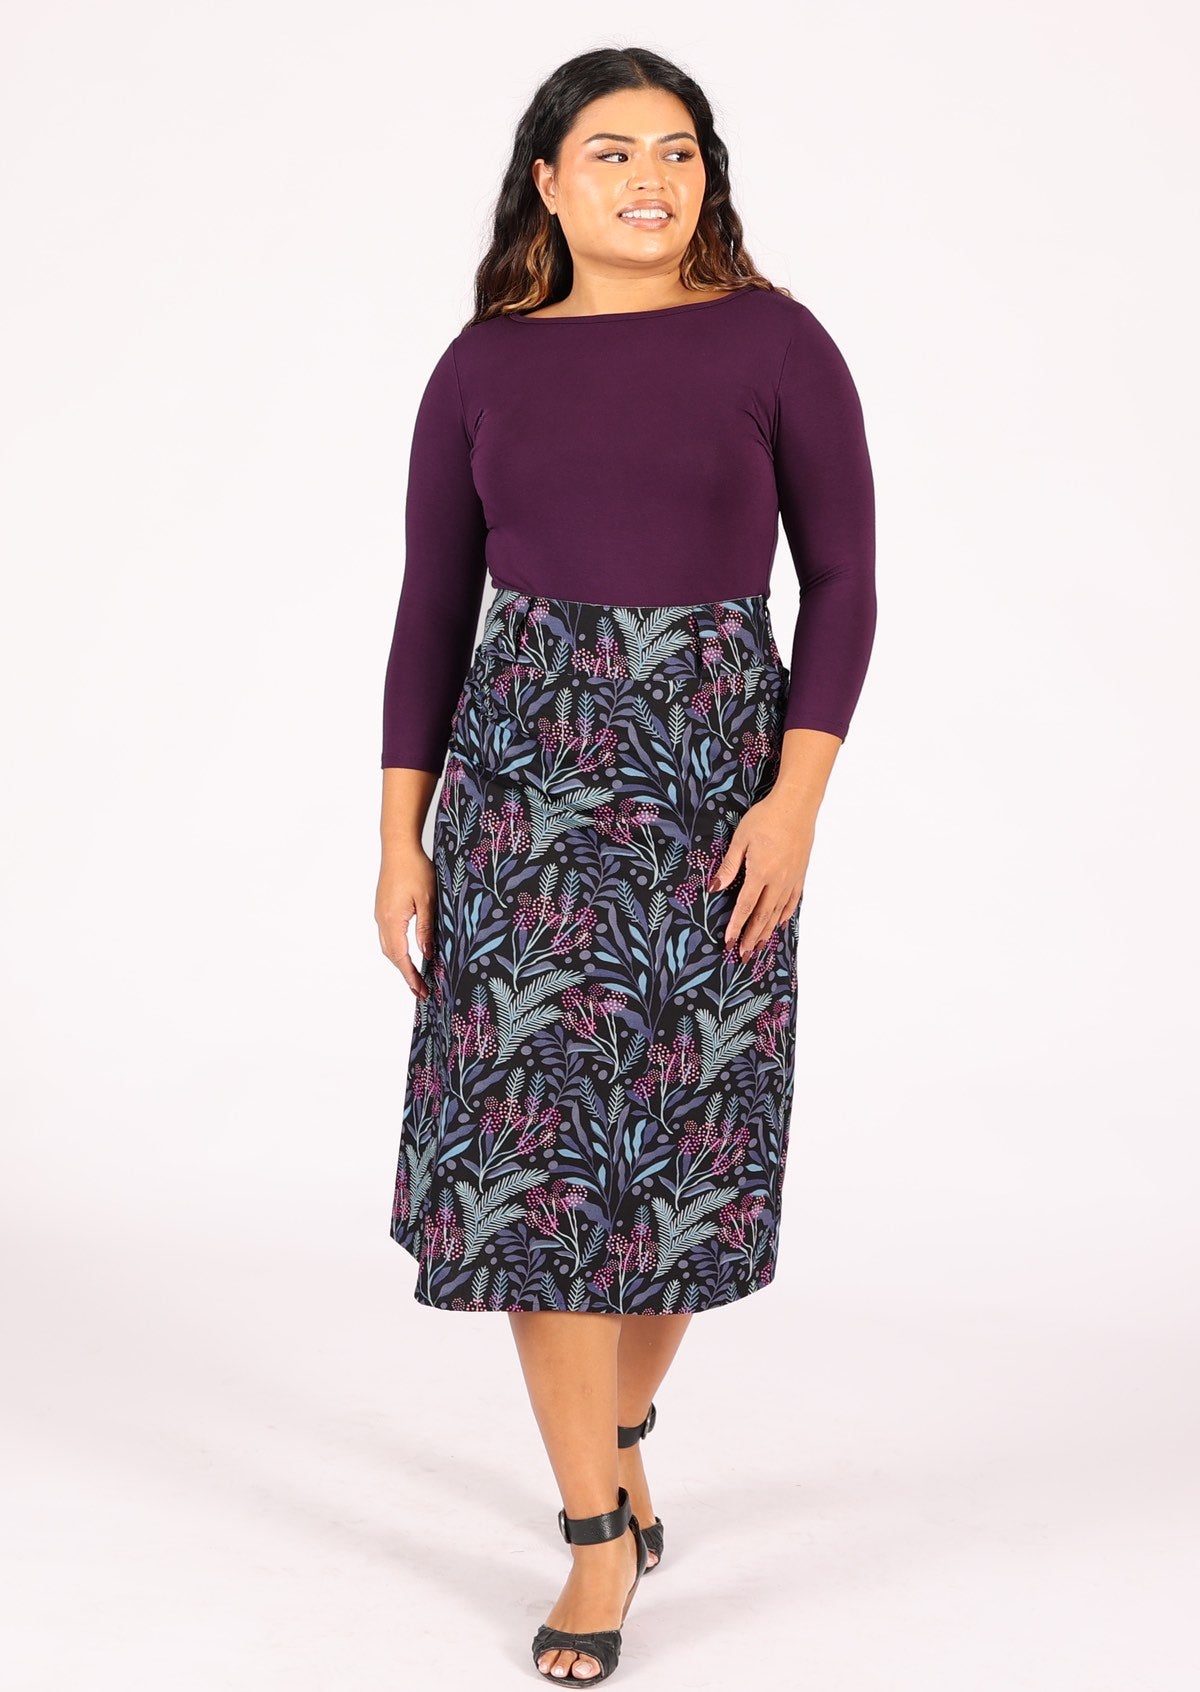 Midi length cotton A-line skirt looks great with wide belt